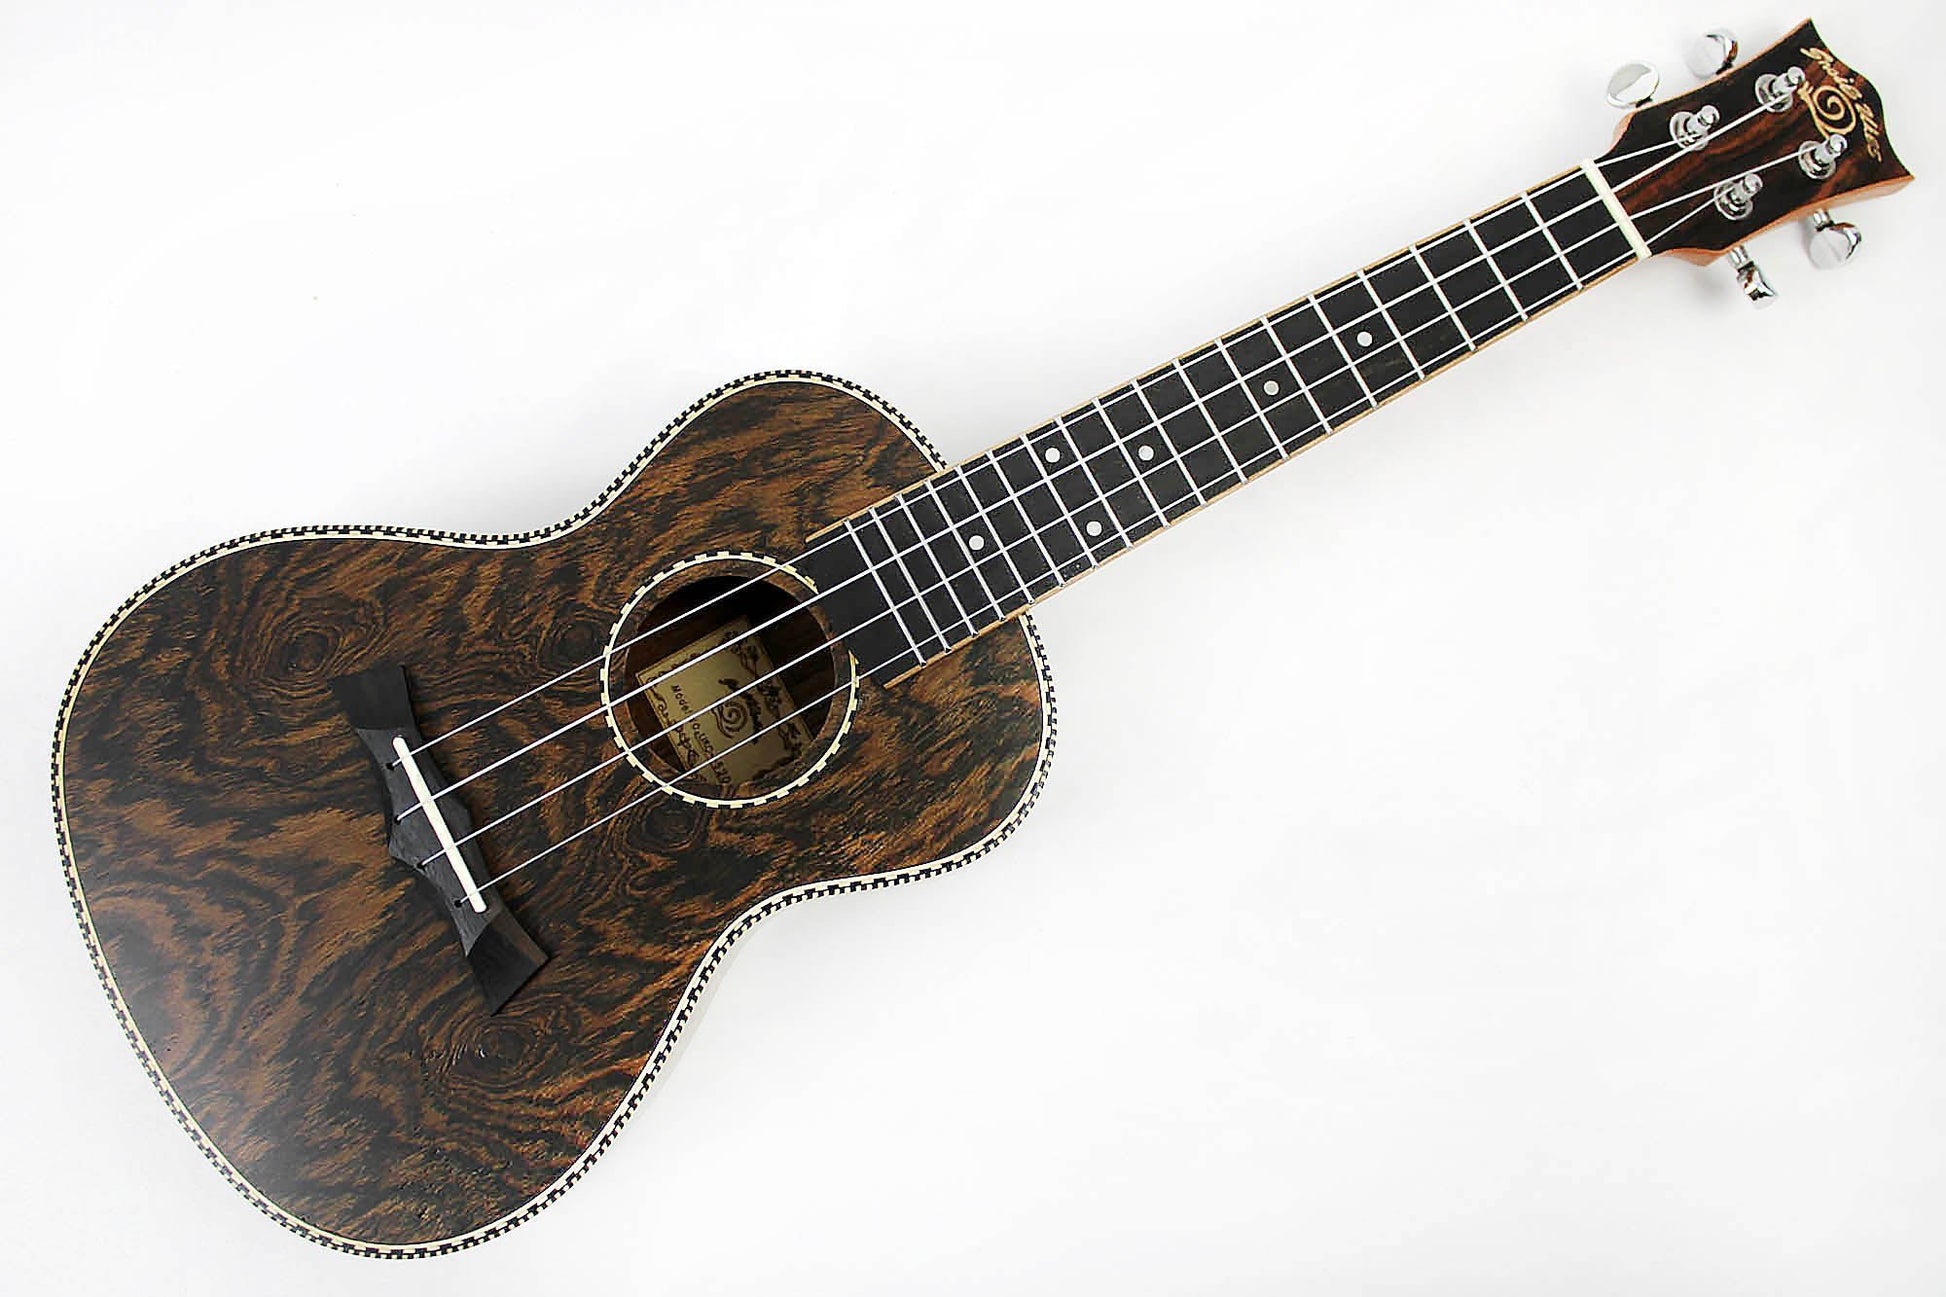 This is the front full view of the top and neck of a Snail SNAILBOCUKC Bocote Concert Ukulele.